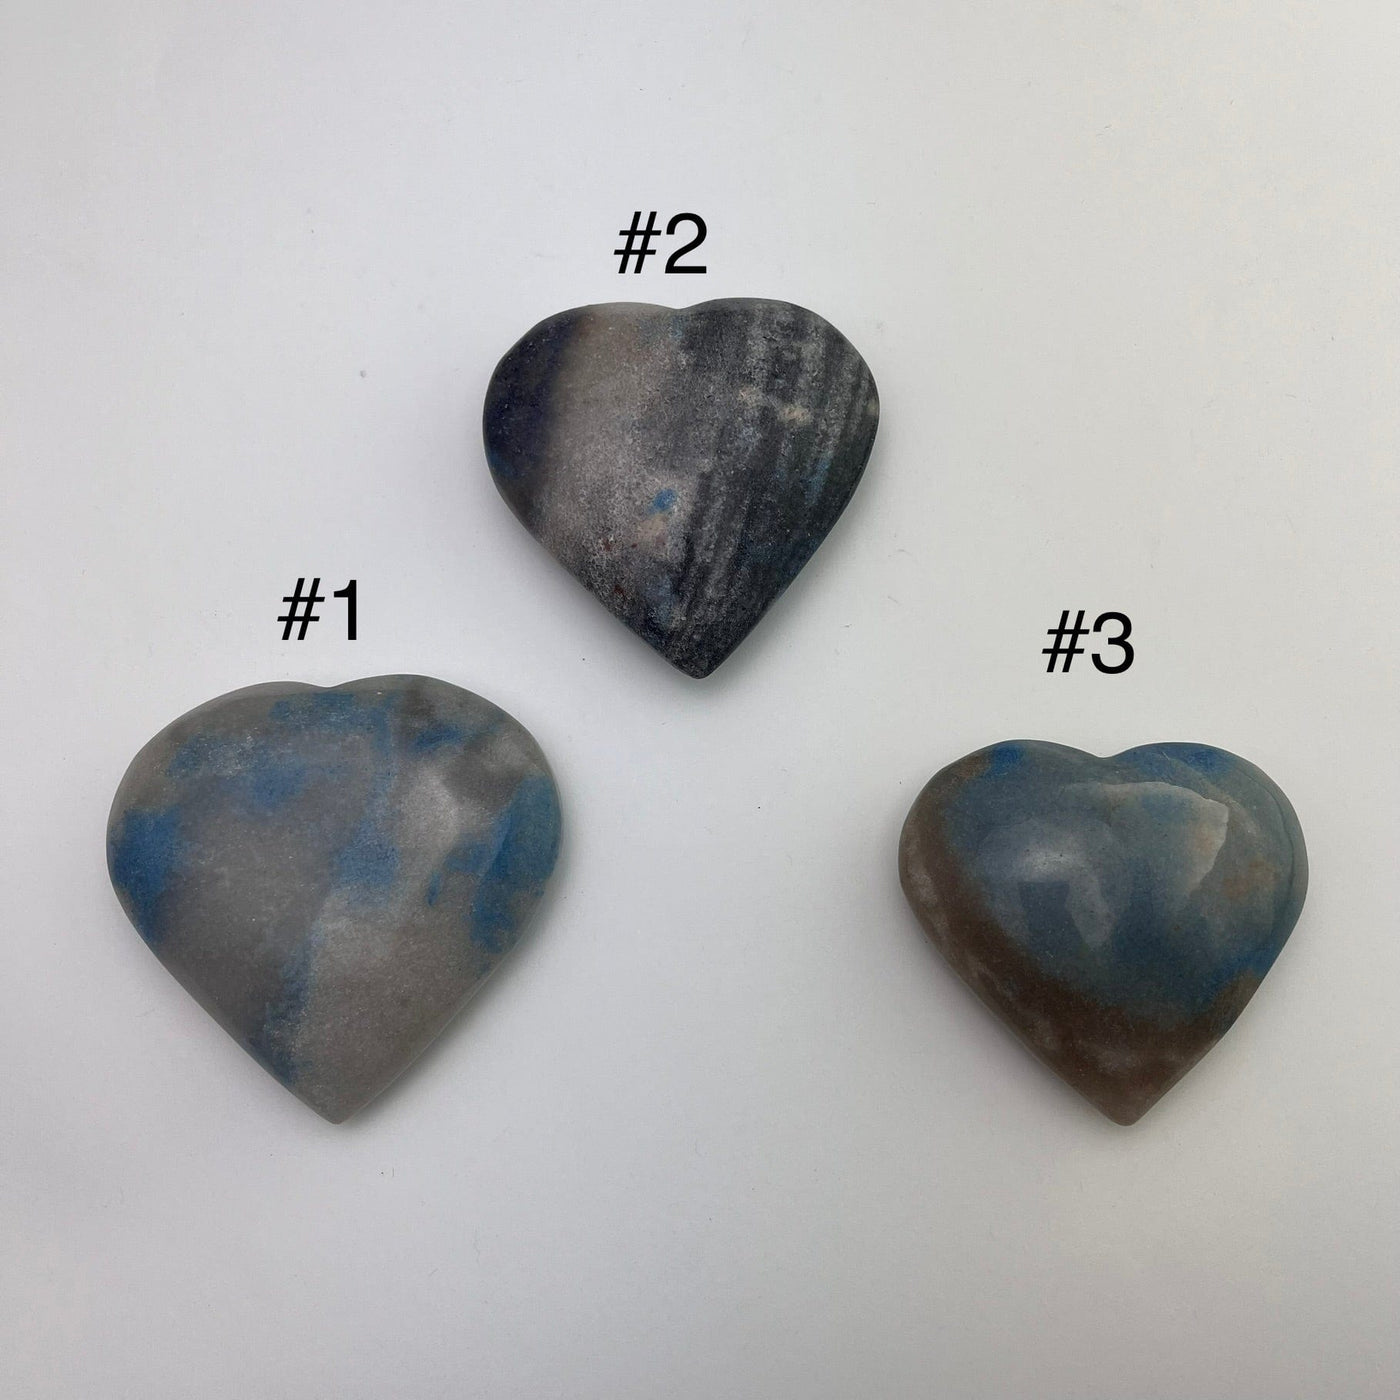 Trolleite Heart Stones - You Choose - back view of three choices 